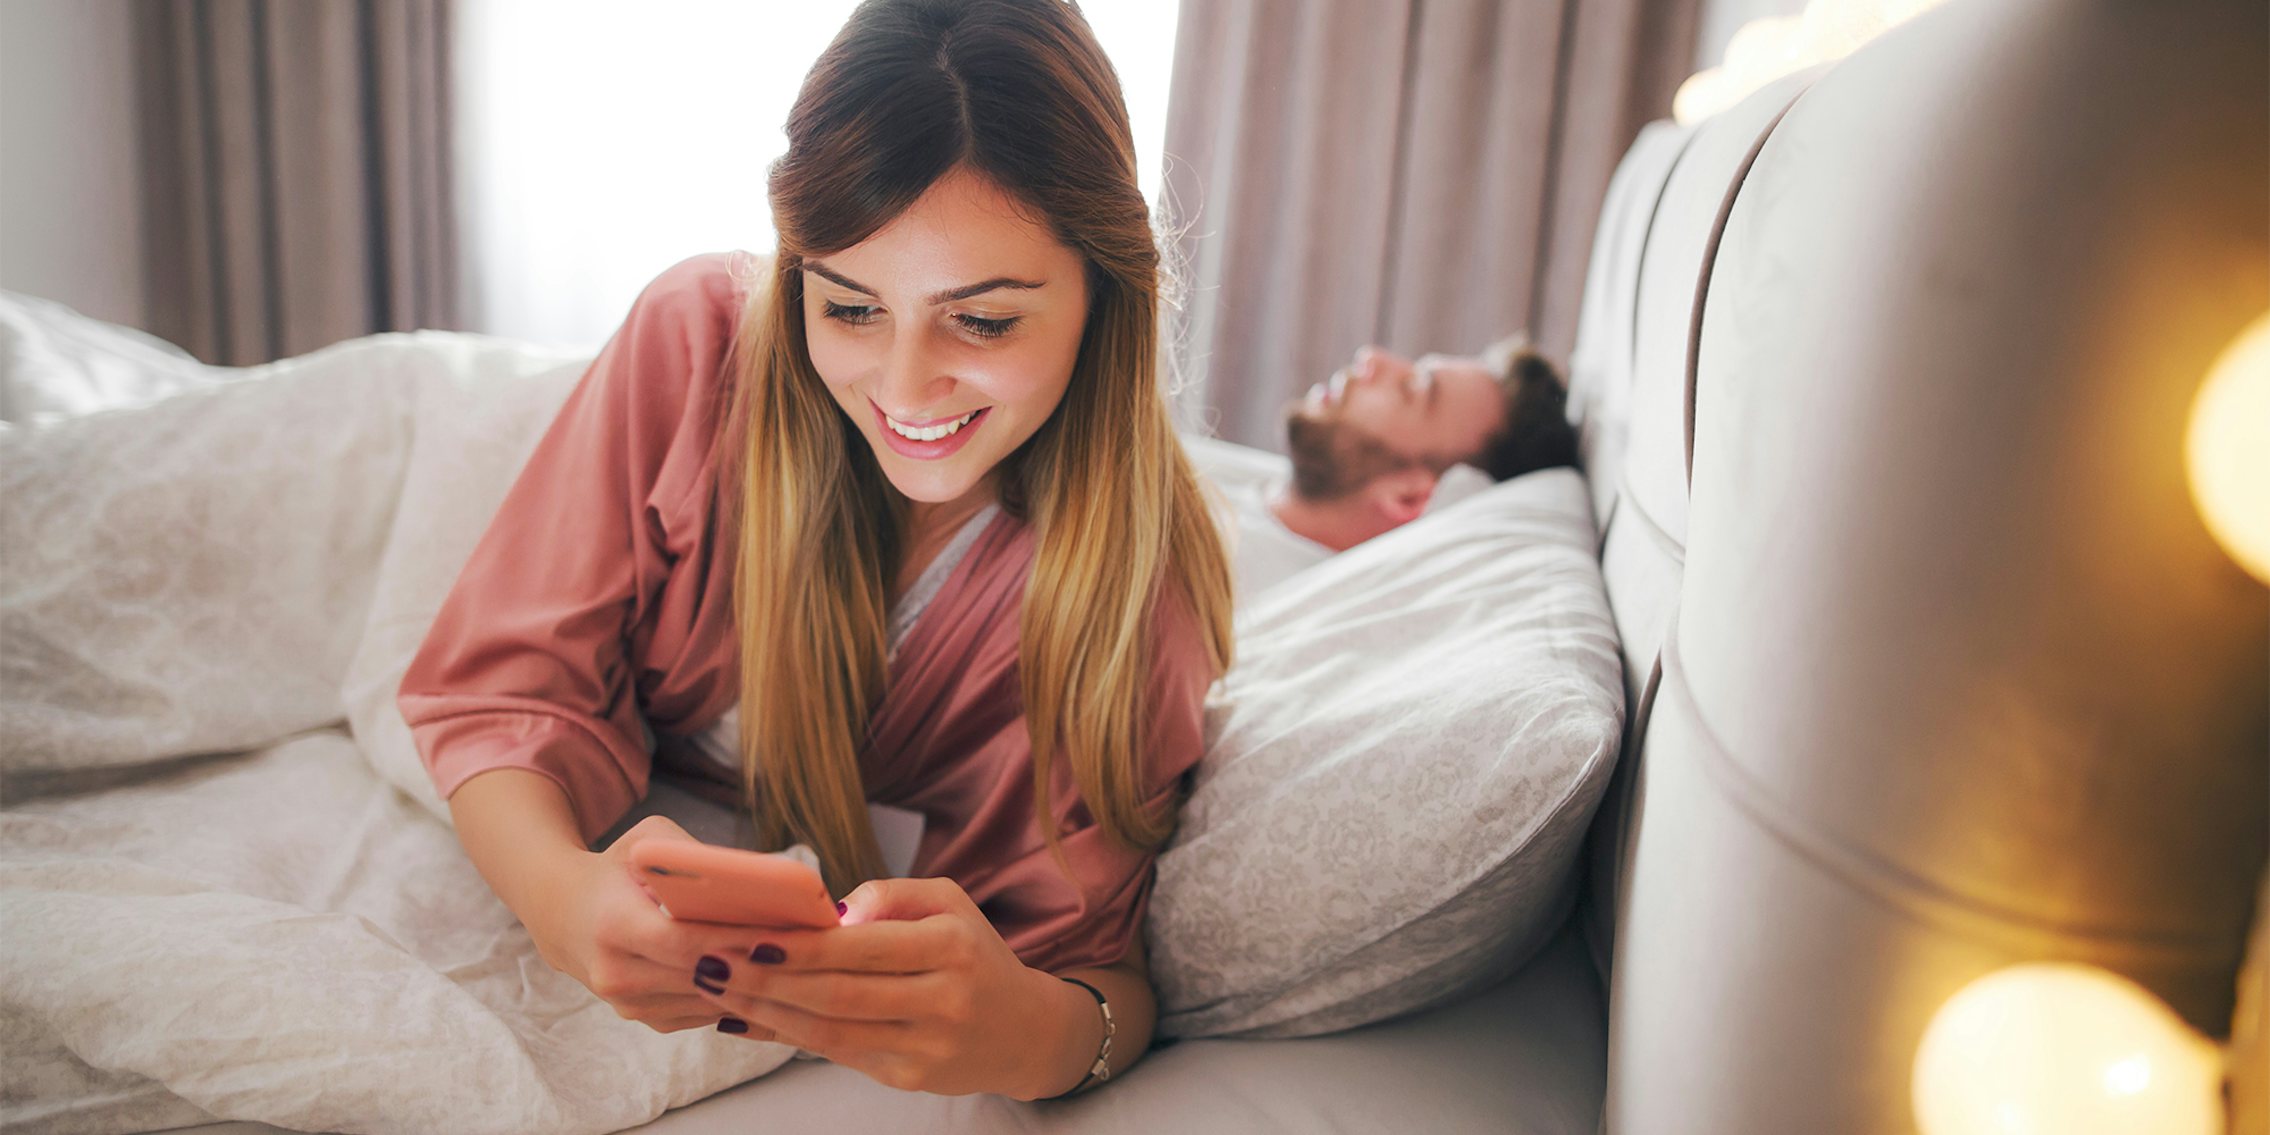 woman about to wake her sleeping partner after seeing her phone